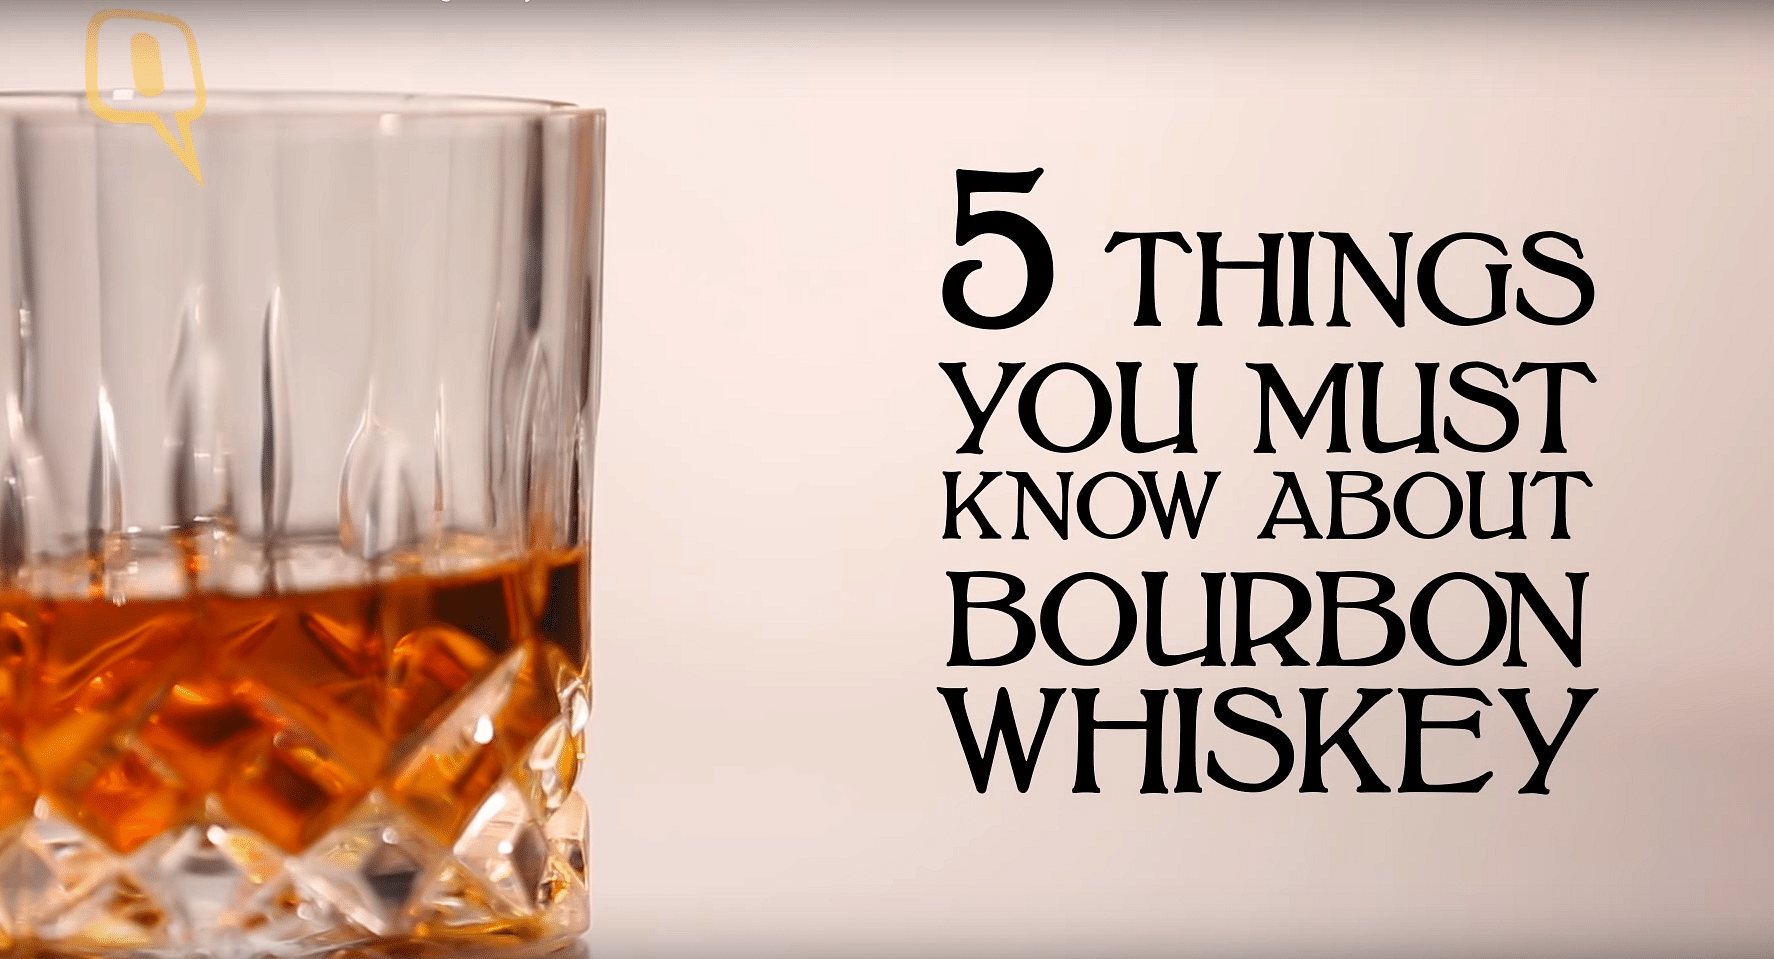 All bourbon is whiskey but not all whiskey is bourbon. (Photo: <b>The Quint</b>)